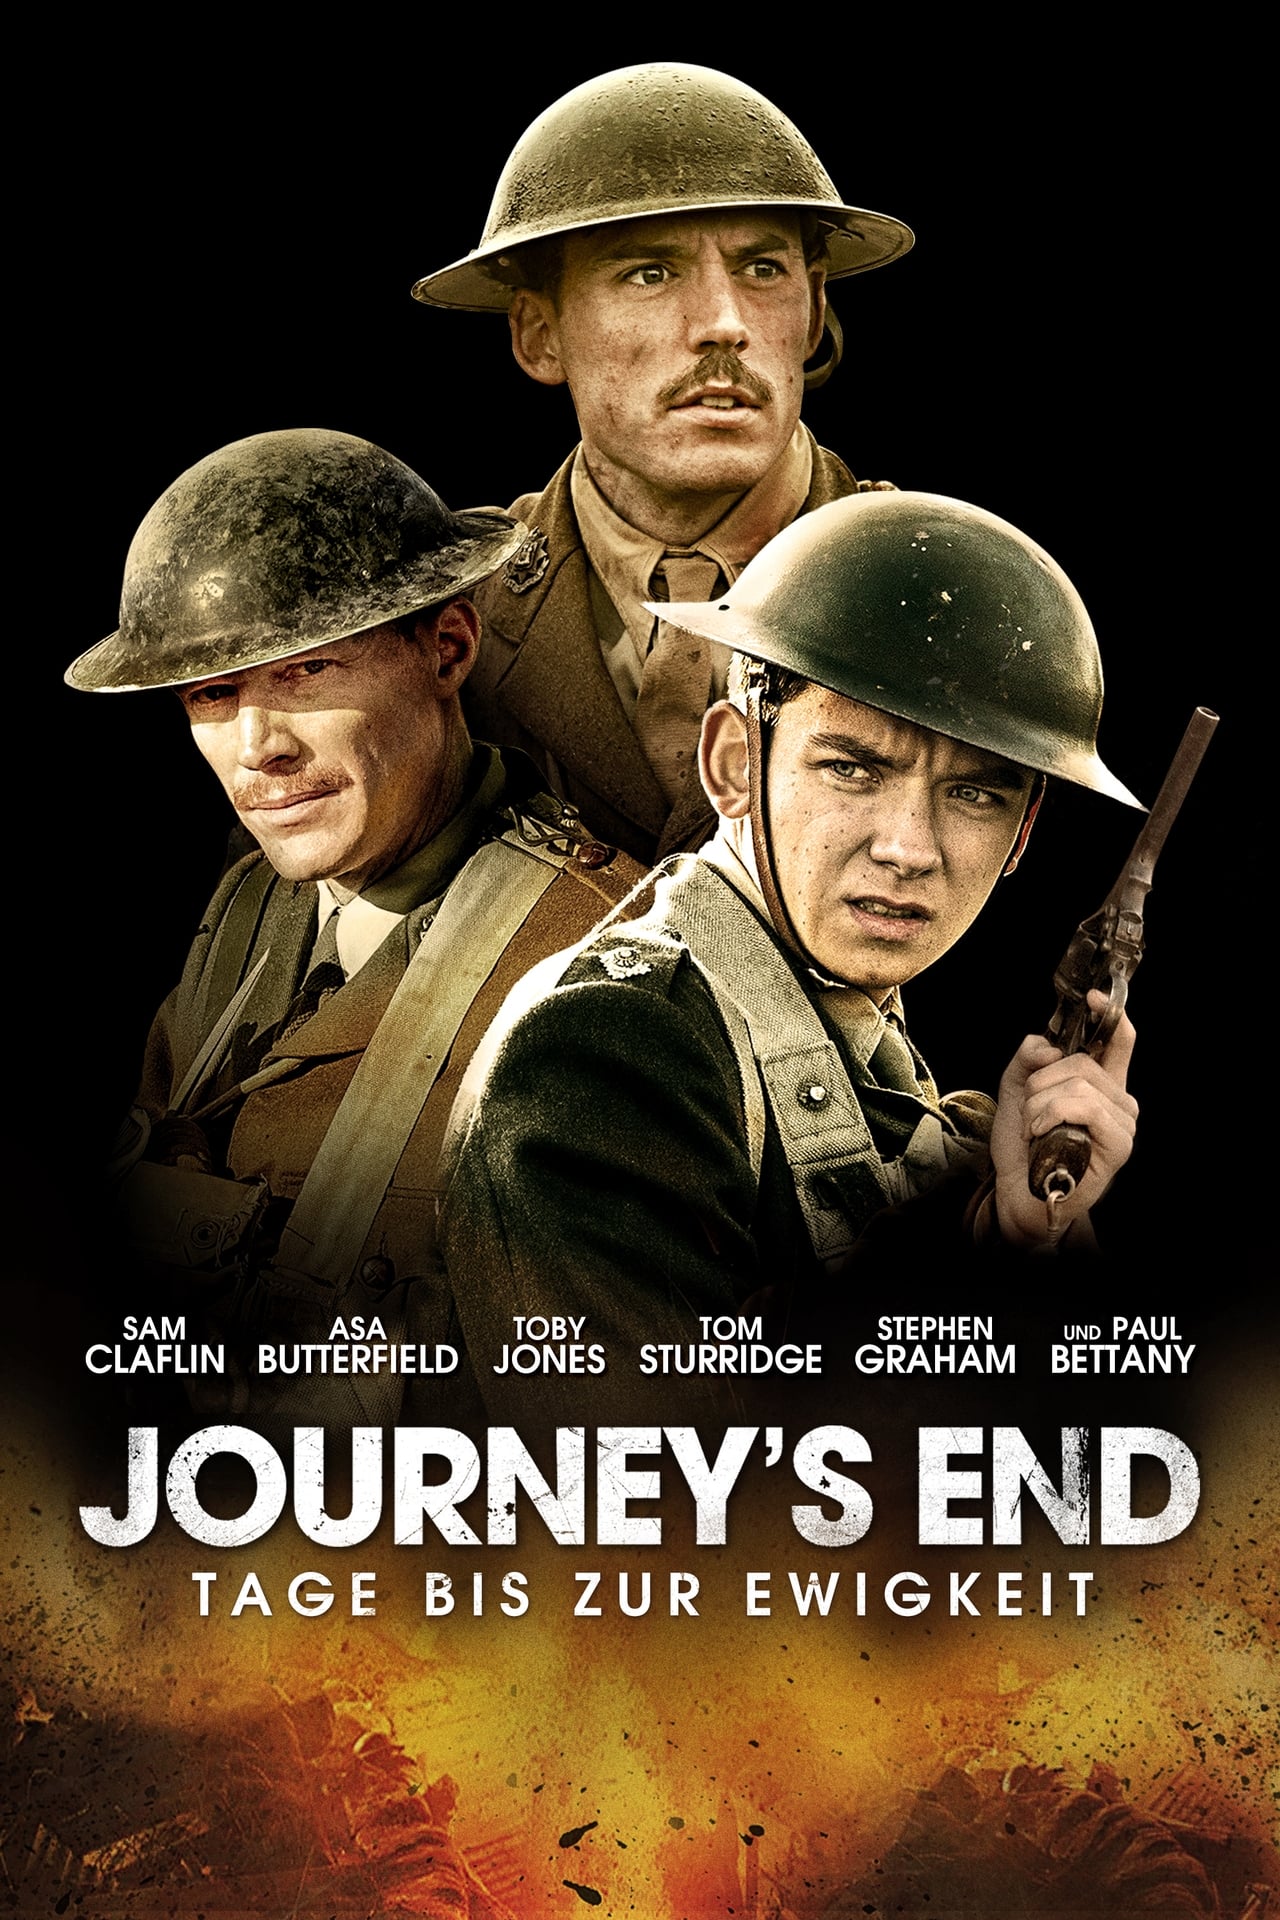 journey's end movie review